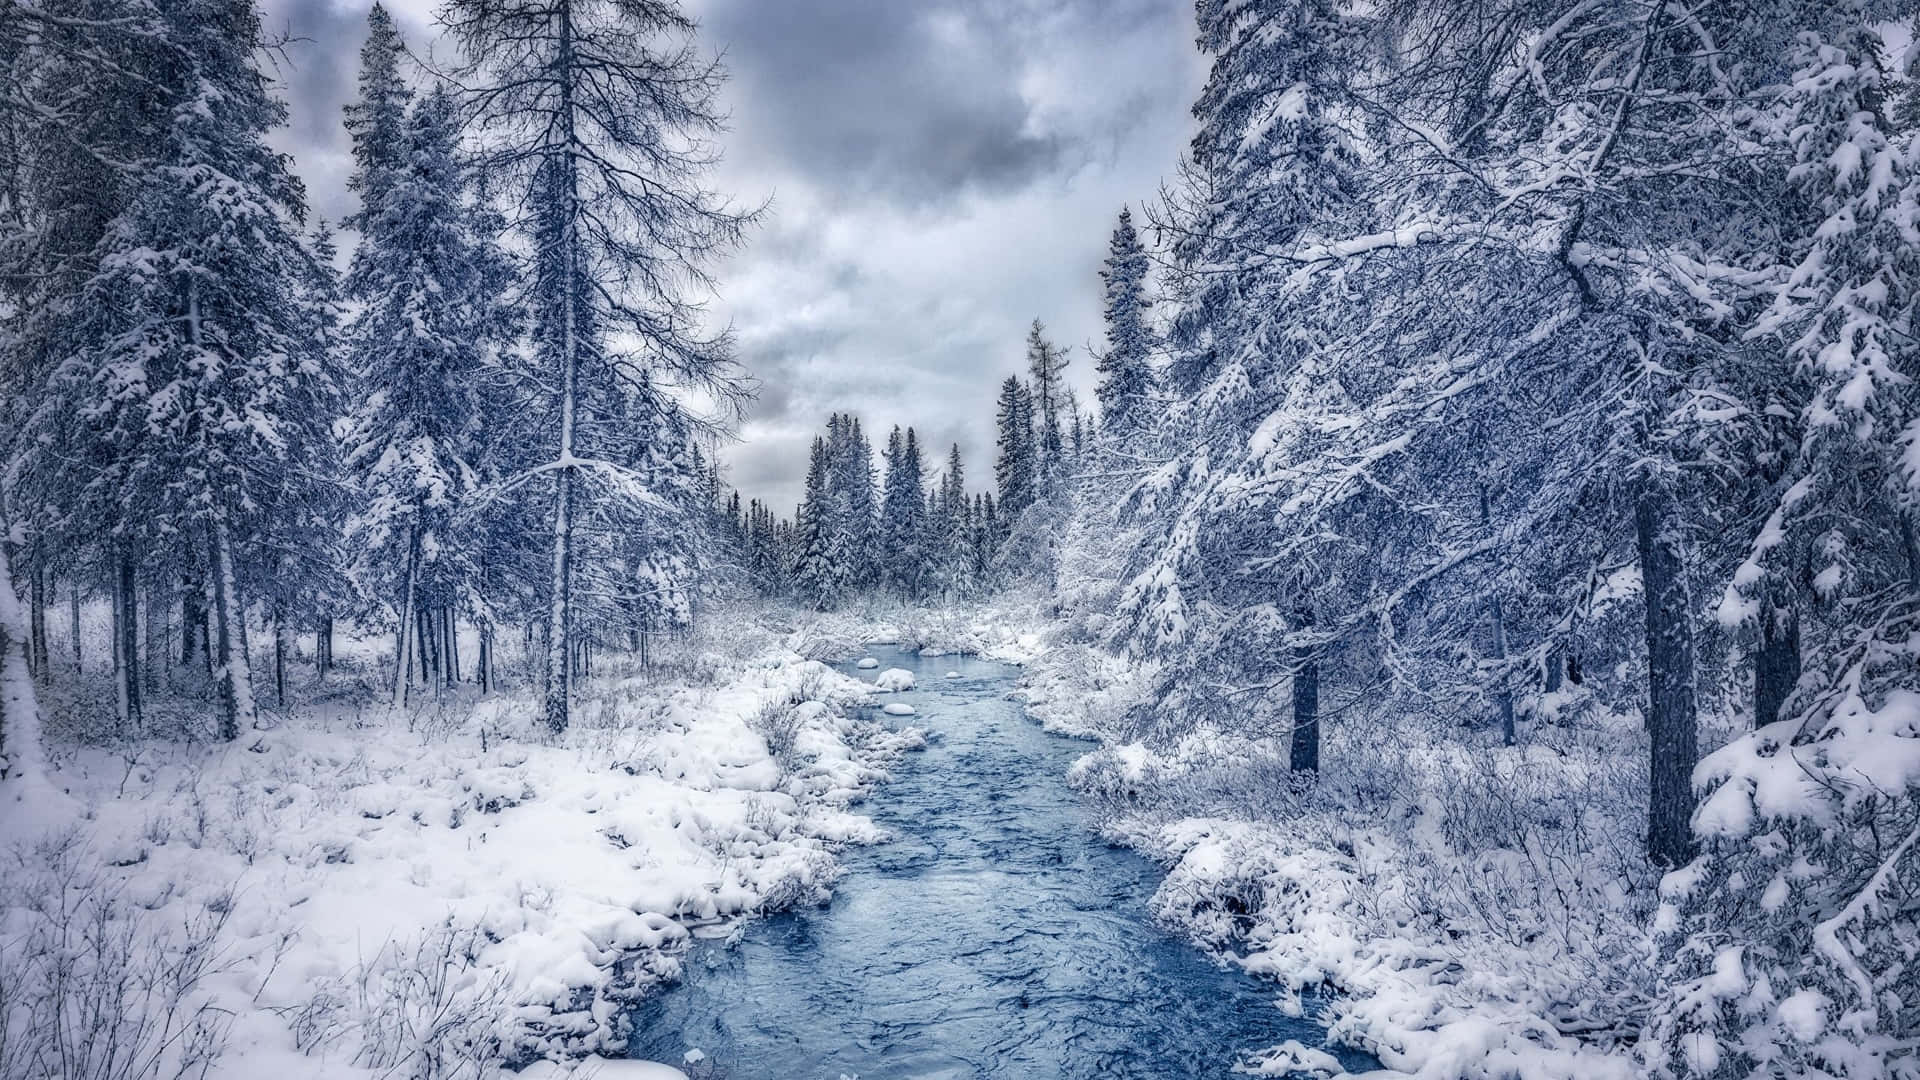 Standing in awe at the beauty of a winter forest Wallpaper